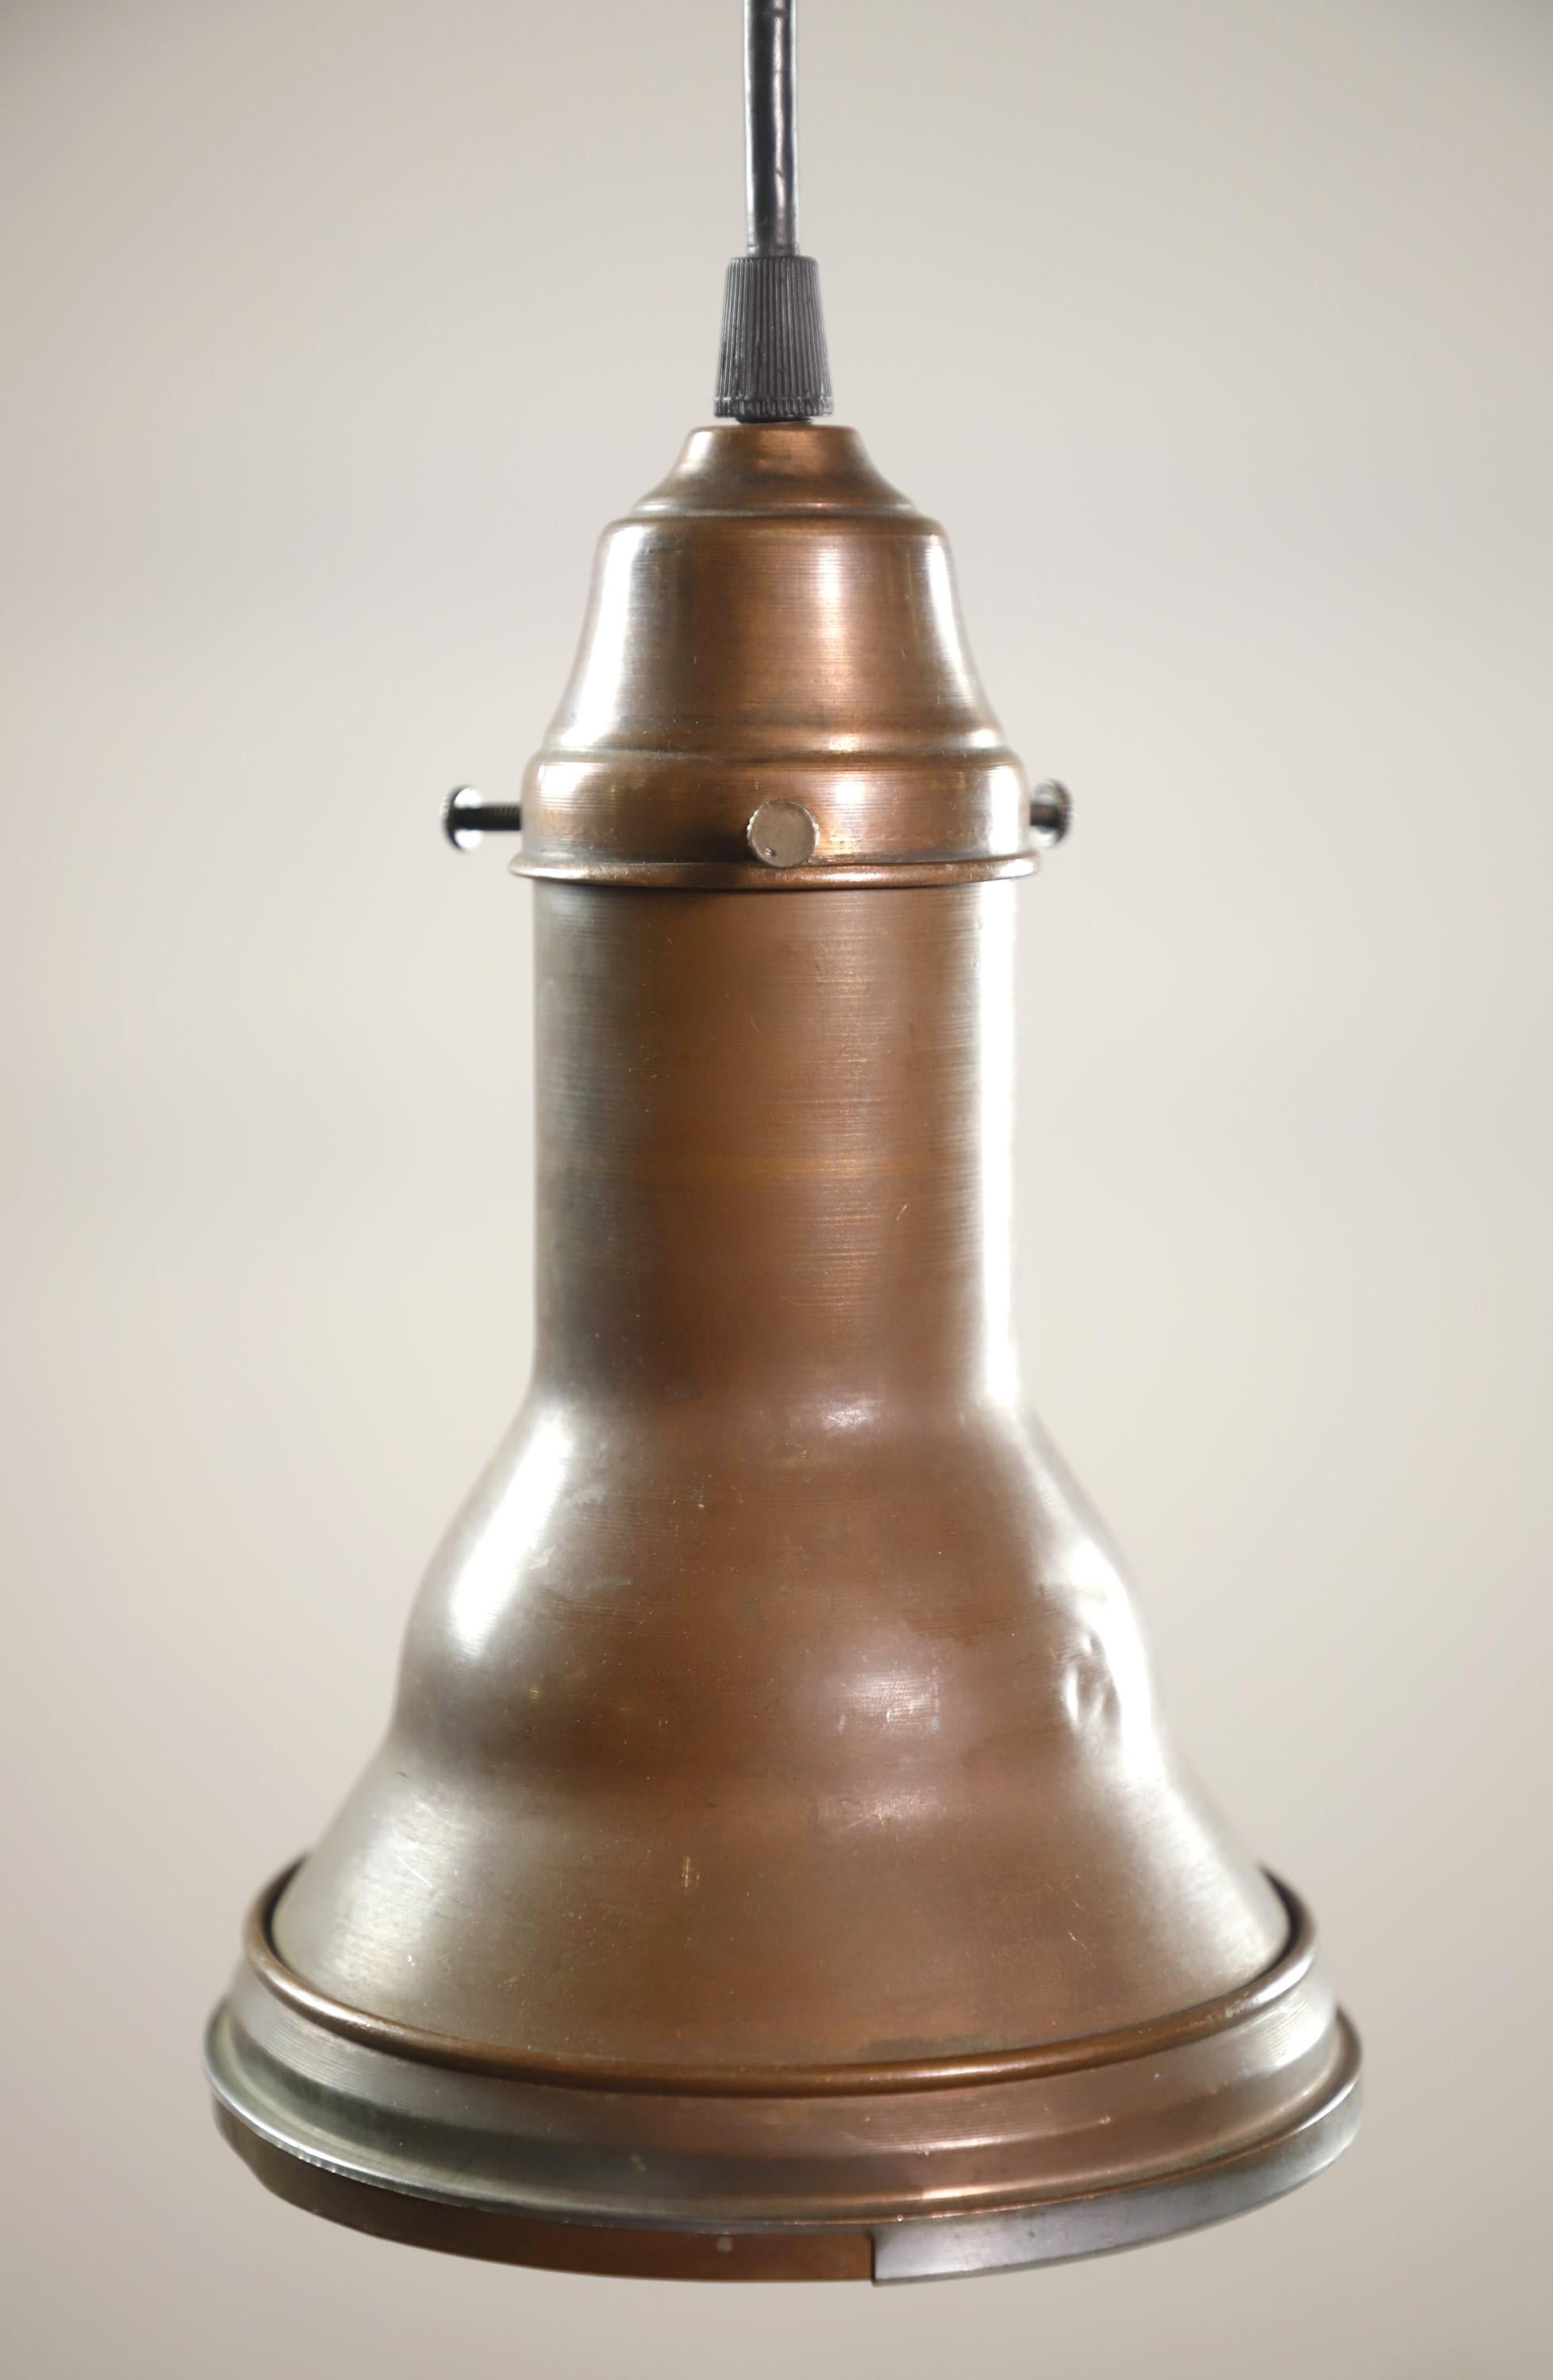 Made by Major Equipment Co., Chicago, Ill. This copper stage light has been rewired and is ready to go. This was originally in the Philadelphia Civic Center in 1929 before its renovation. Cleaned and restored. The shade has typical wear and tear